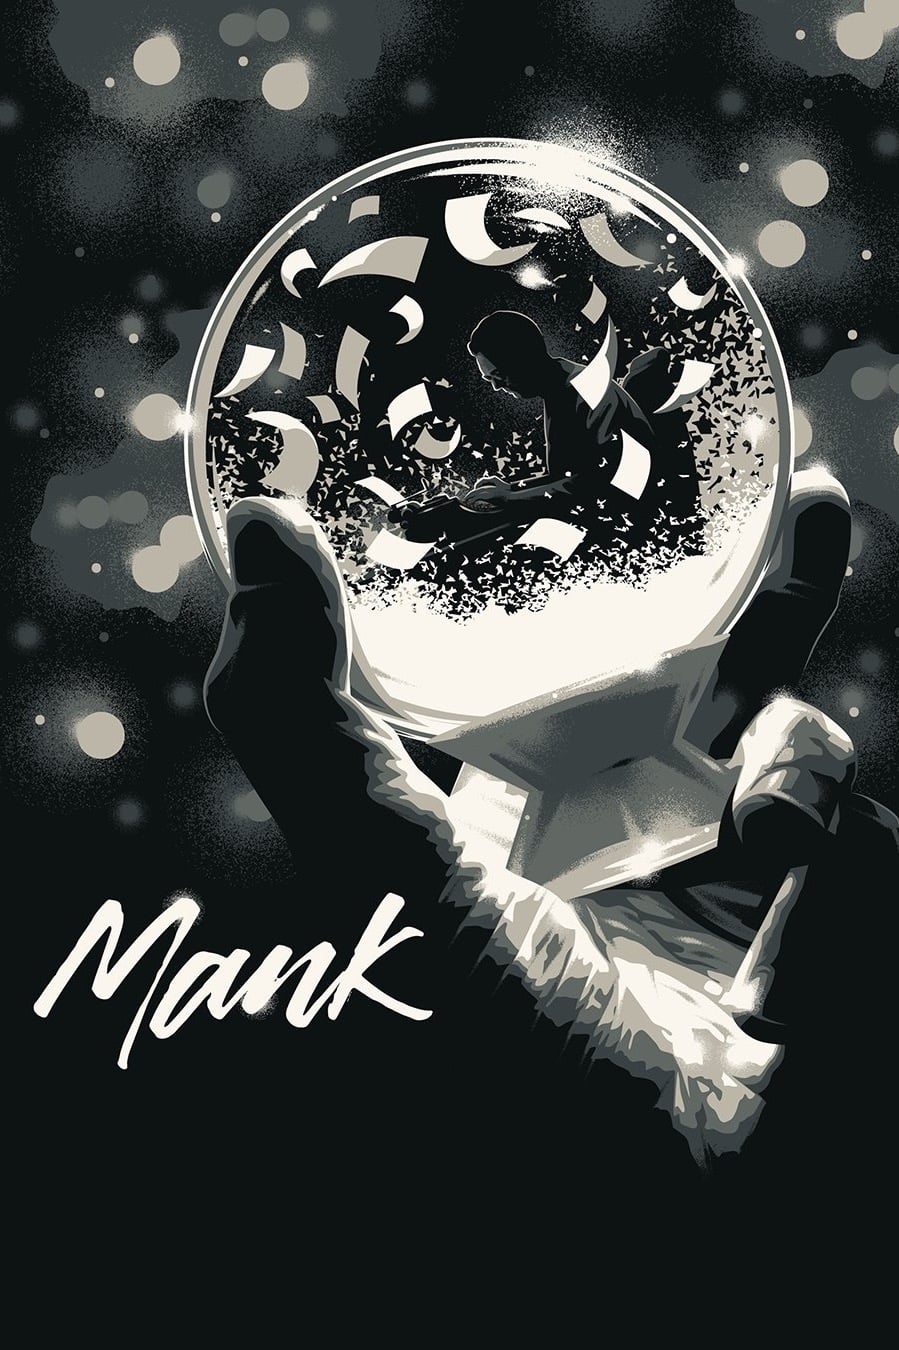 Poster for the movie "Mank"